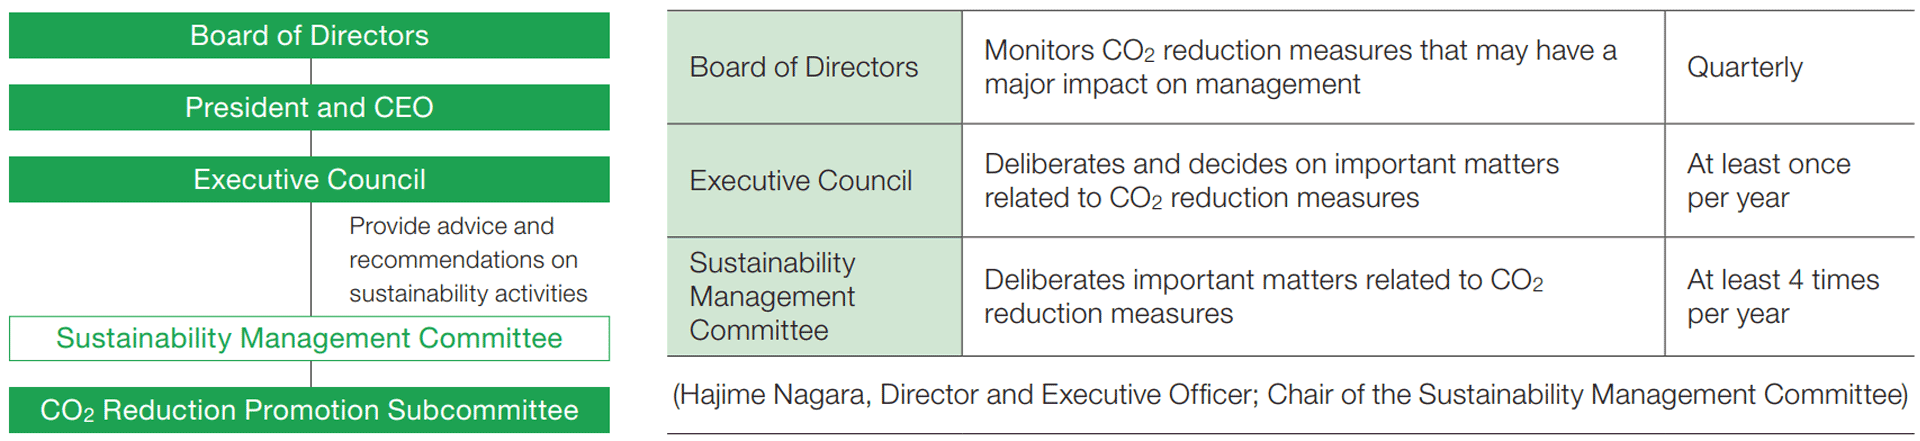 Climate-Related Governance Structure